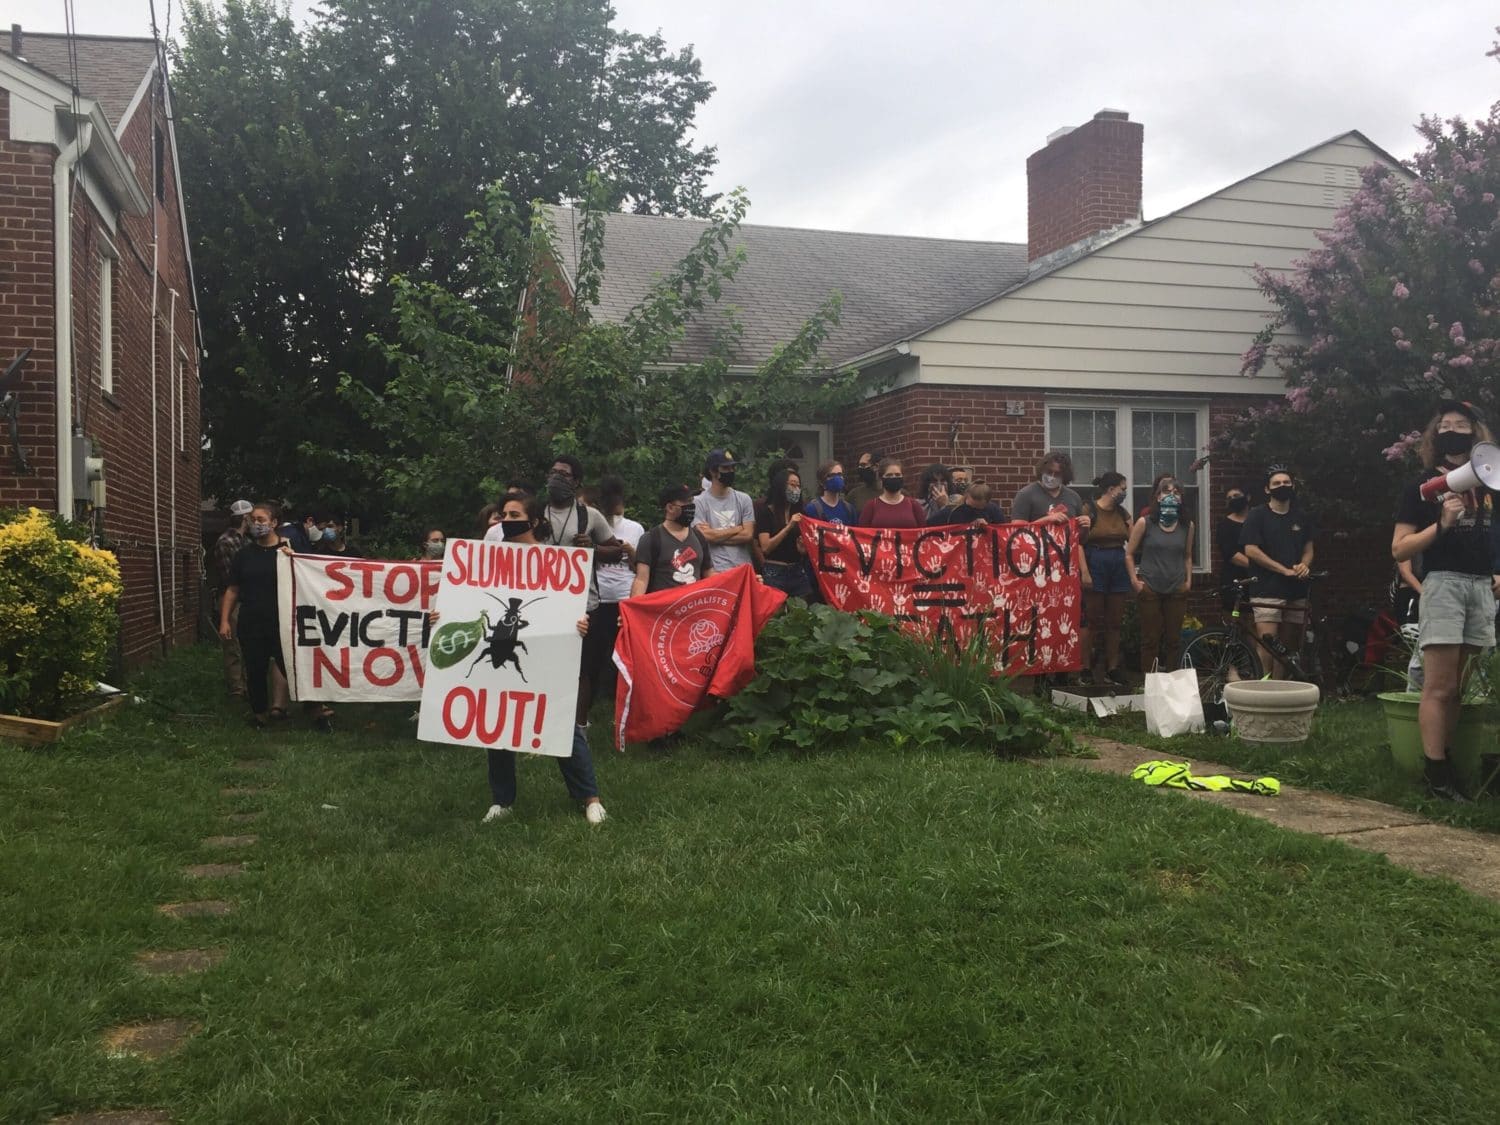 Photo of advocates standing and holding banners in a patch of grass outside of a residential building in Chillum, MD.